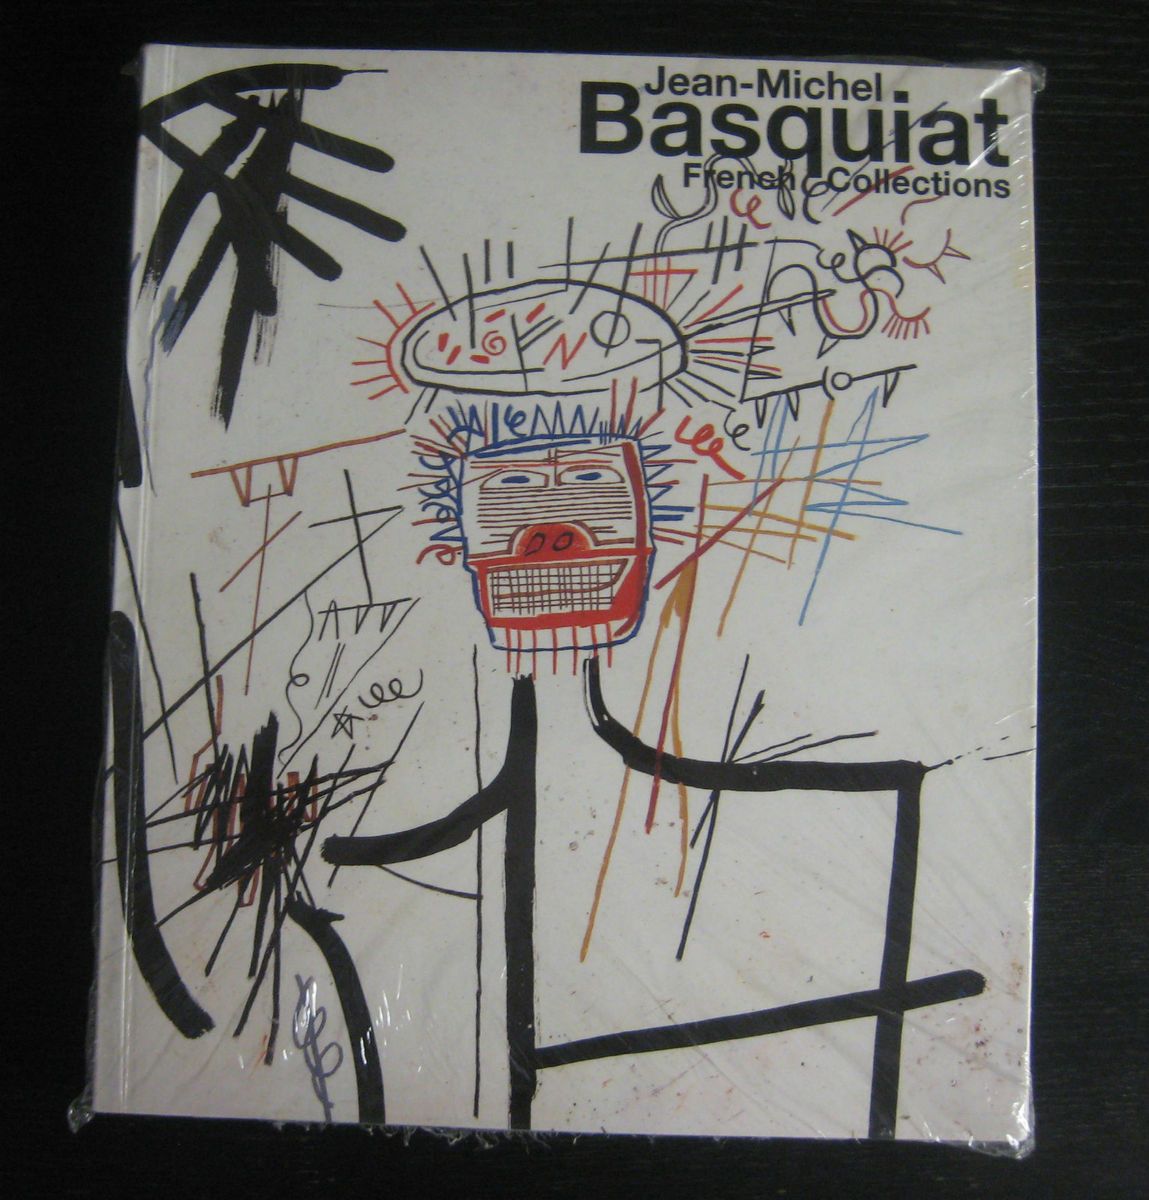 NEW Jean Michel Basquiat French Collections Neo expressionist